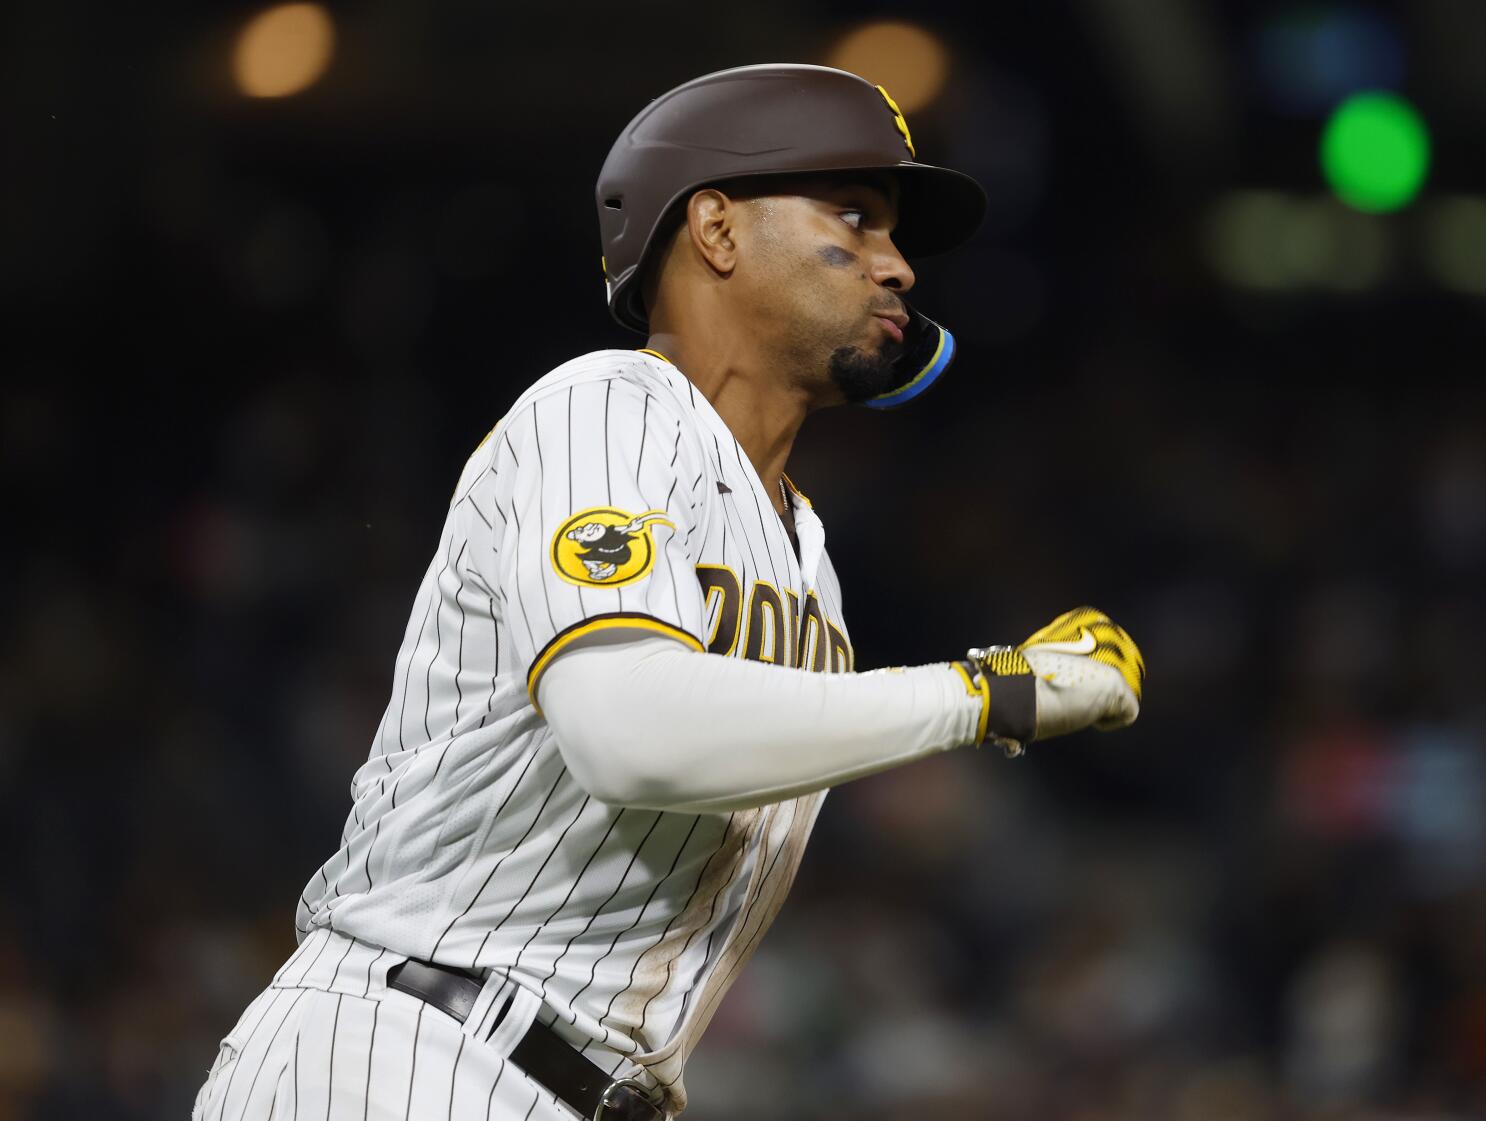 Xander Bogaerts: The Key Player for San Diego Padres in Game